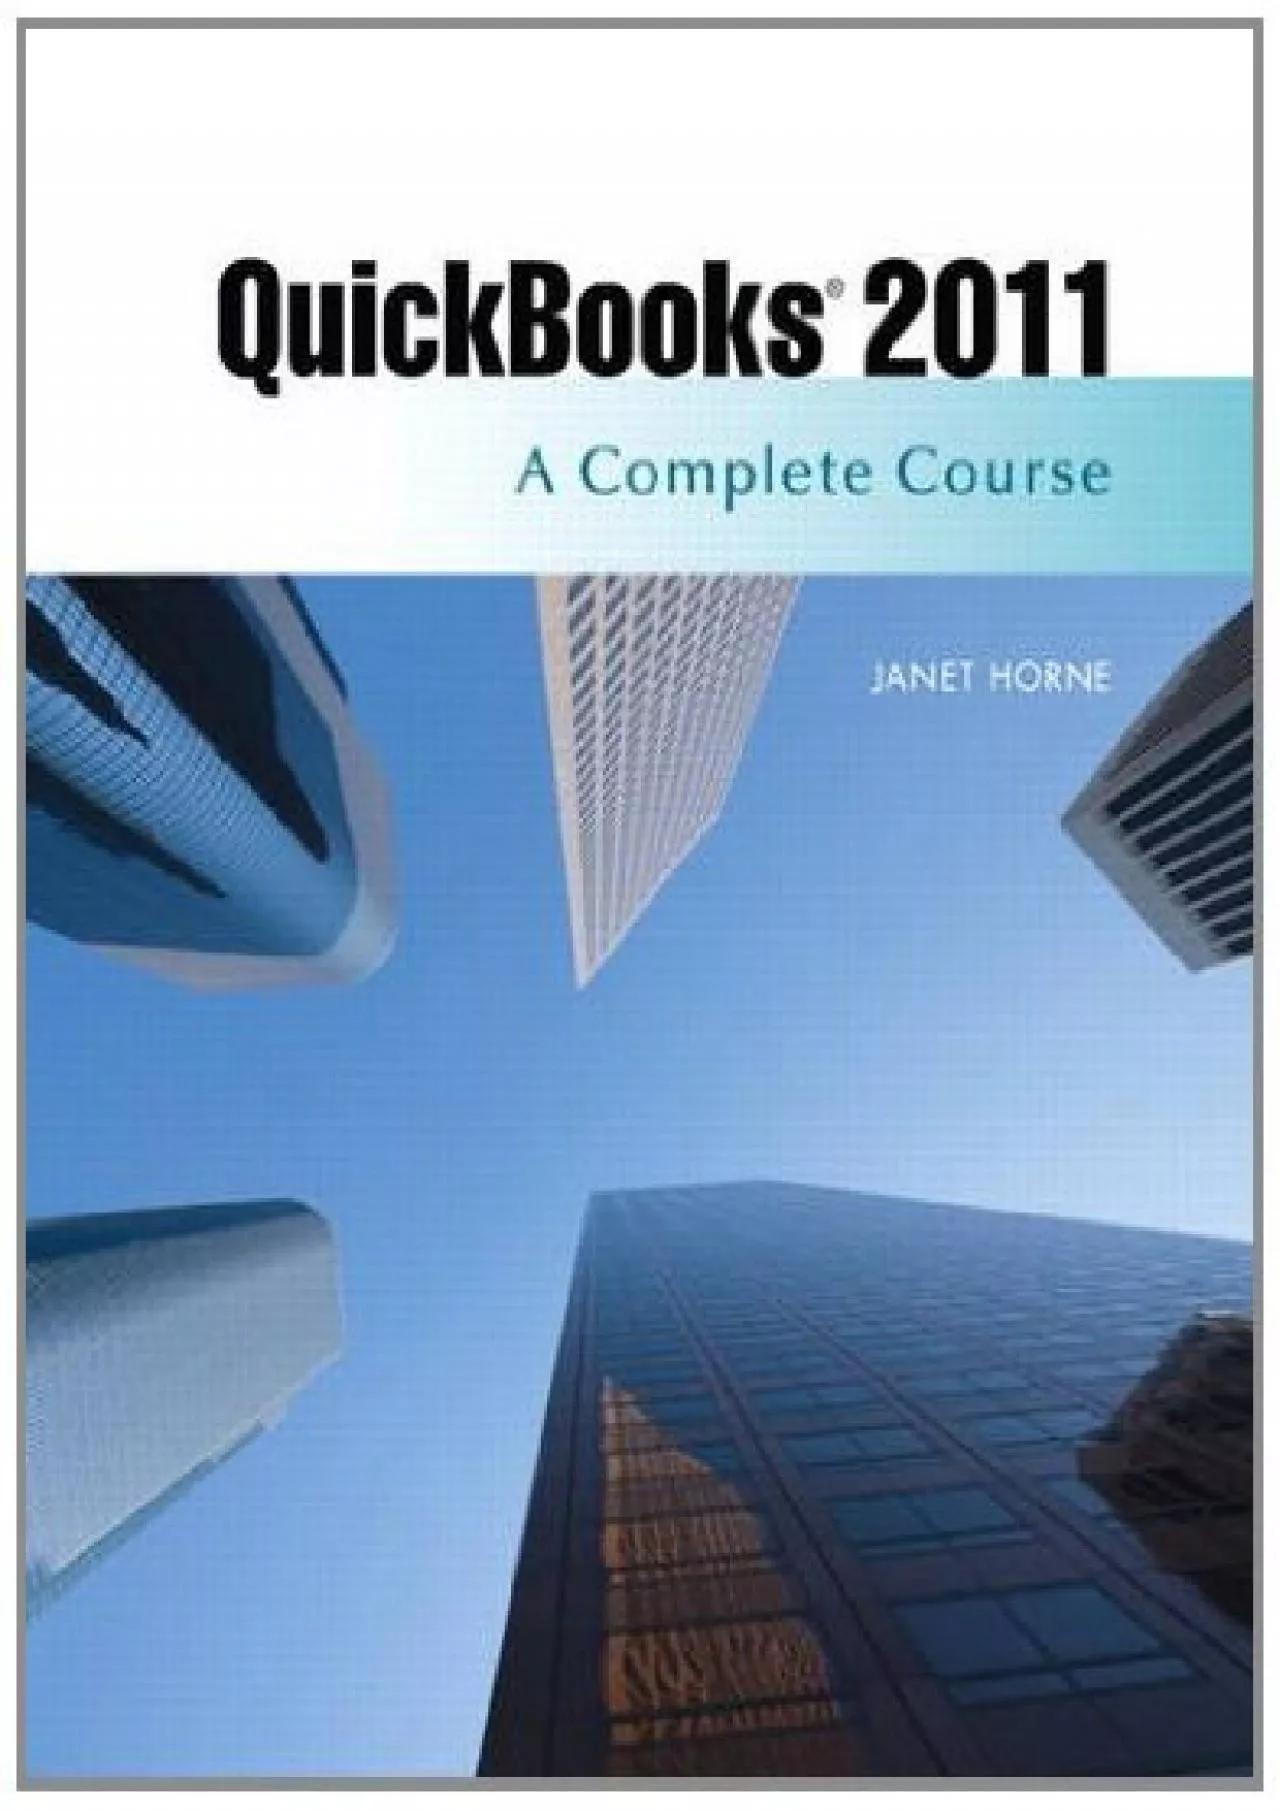 (EBOOK)-QuickBooks 2011: A Complete Course and QuickBooks 2011 Software (12th Edition)